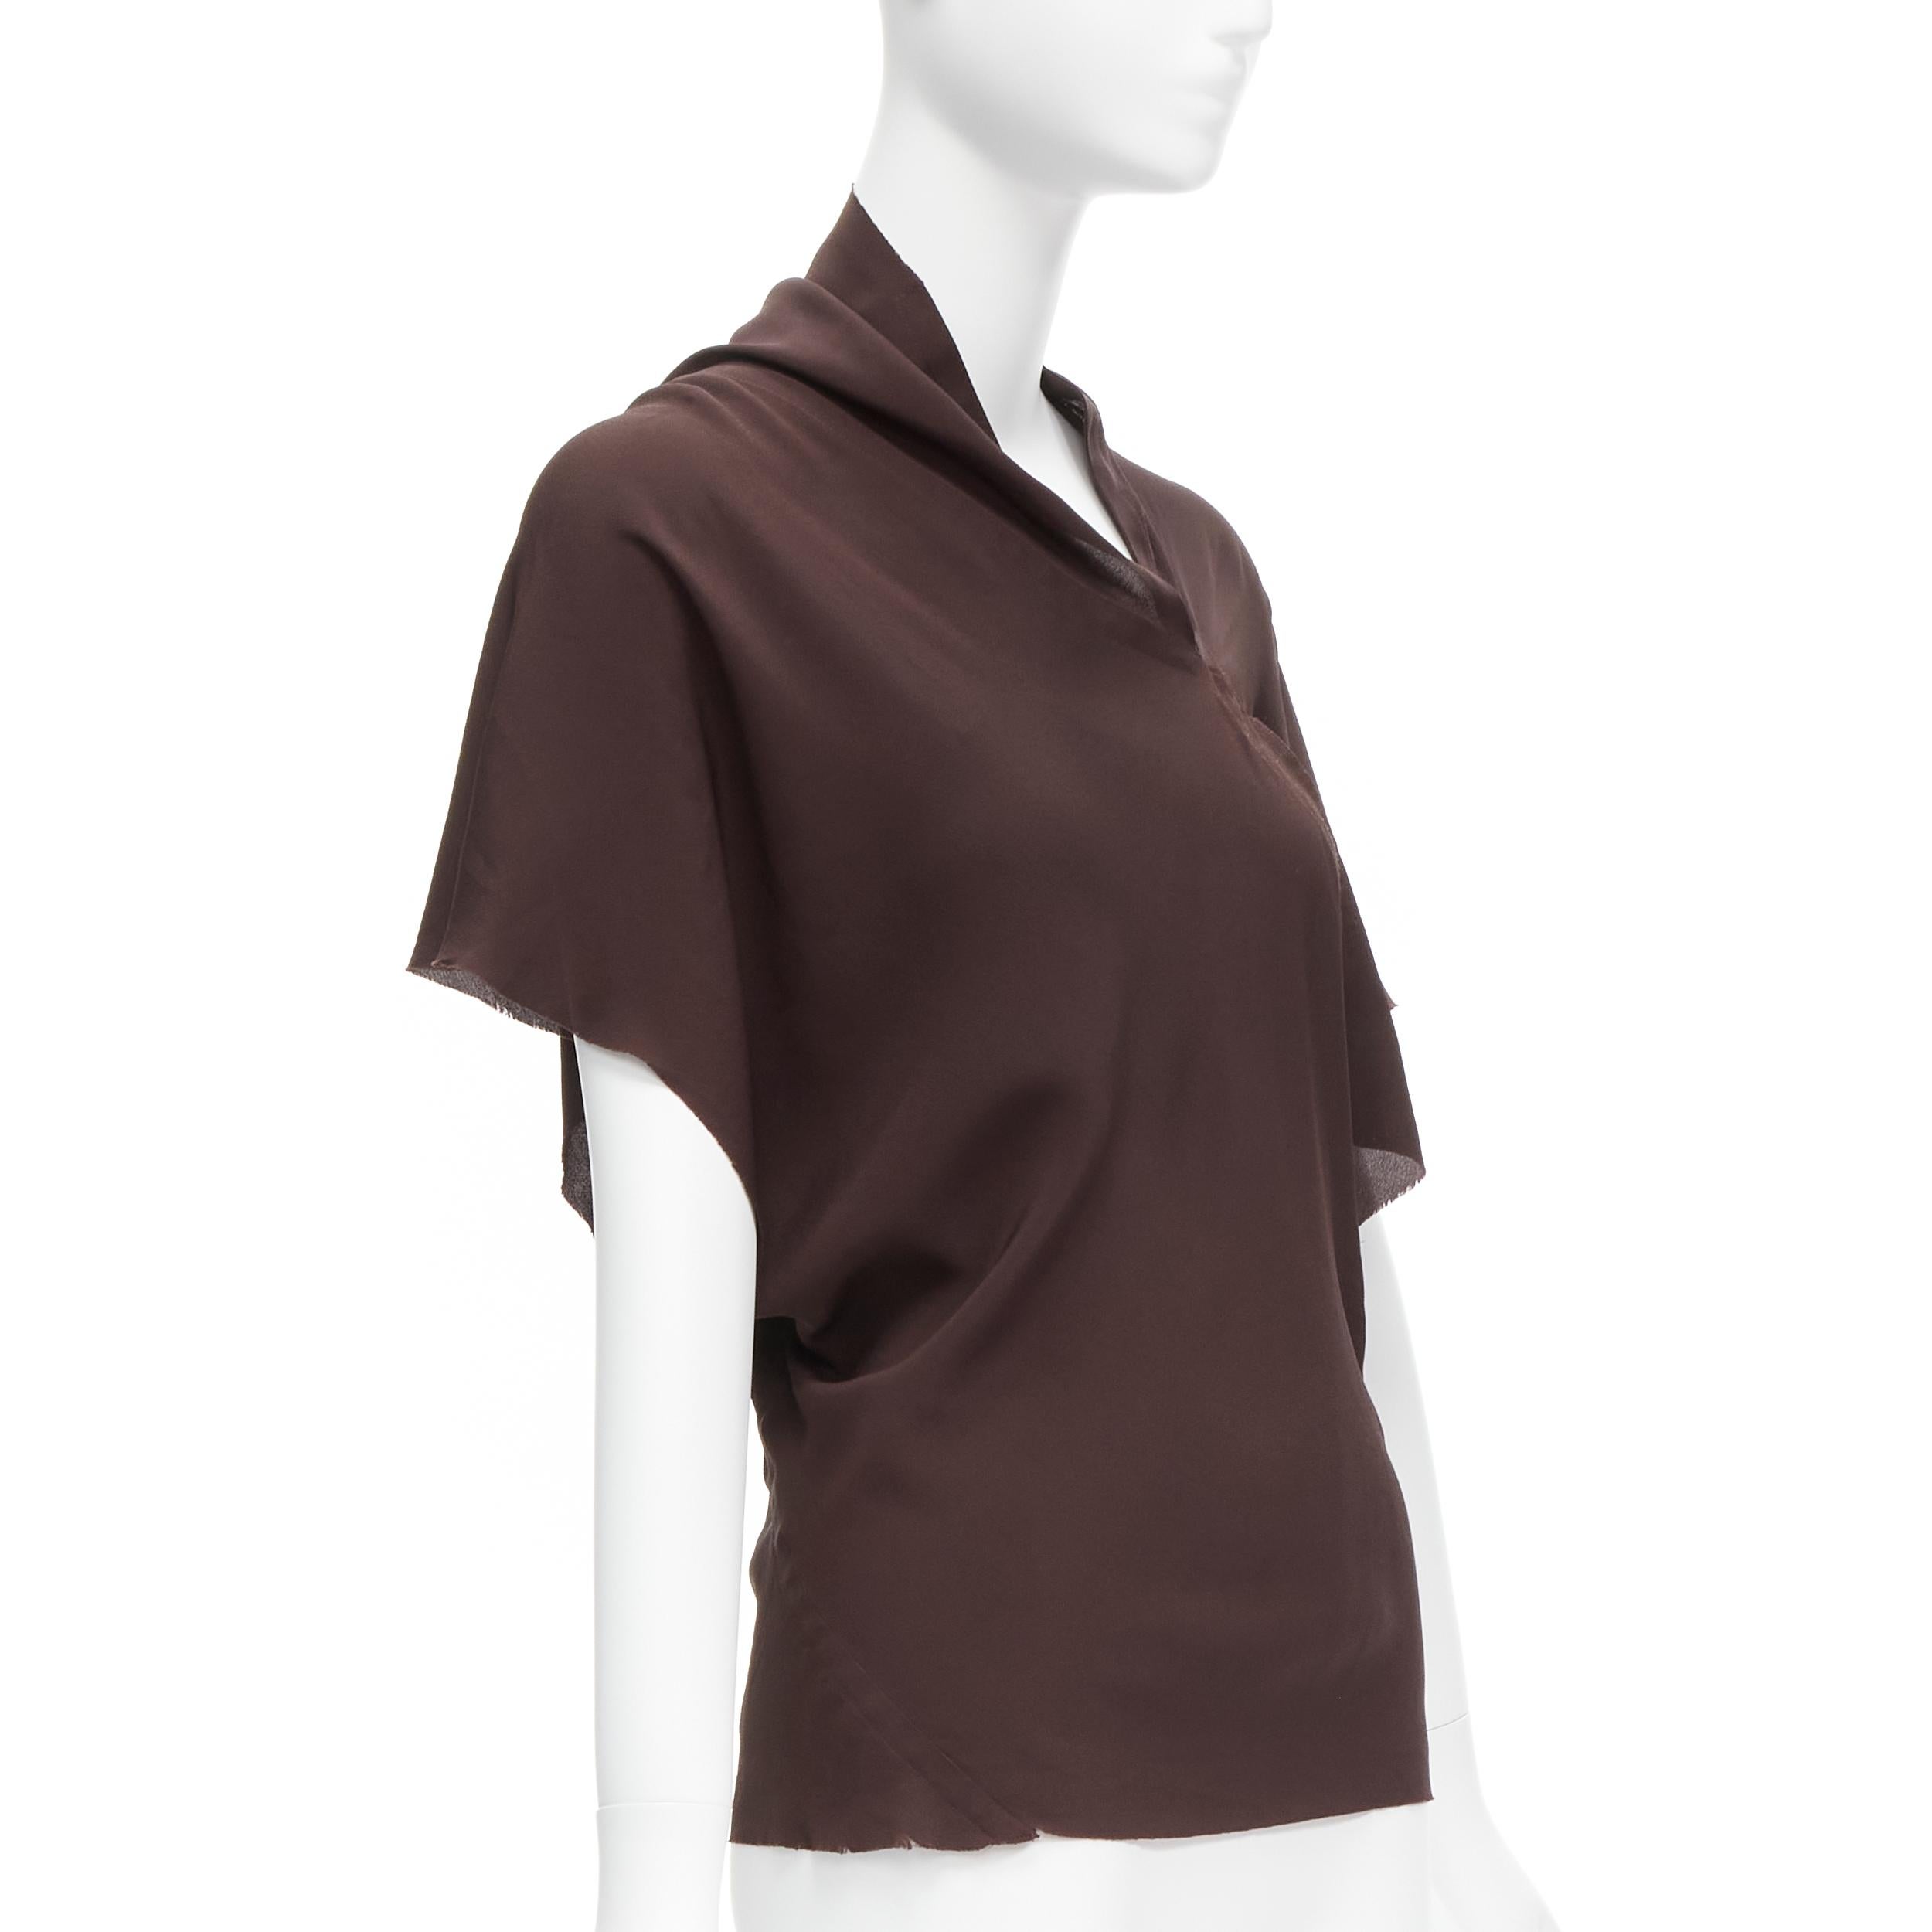 RICK OWENS 2022 Fogachine dark brown acetate silk bias asymmetric draped top IT38 XS
Reference: TGAS/D00151
Brand: Rick Owens
Designer: Rick Owens
Model: Fogachine
Collection: Spring 2022
Material: Acetate, Silk
Color: Brown
Pattern: Solid
Closure: